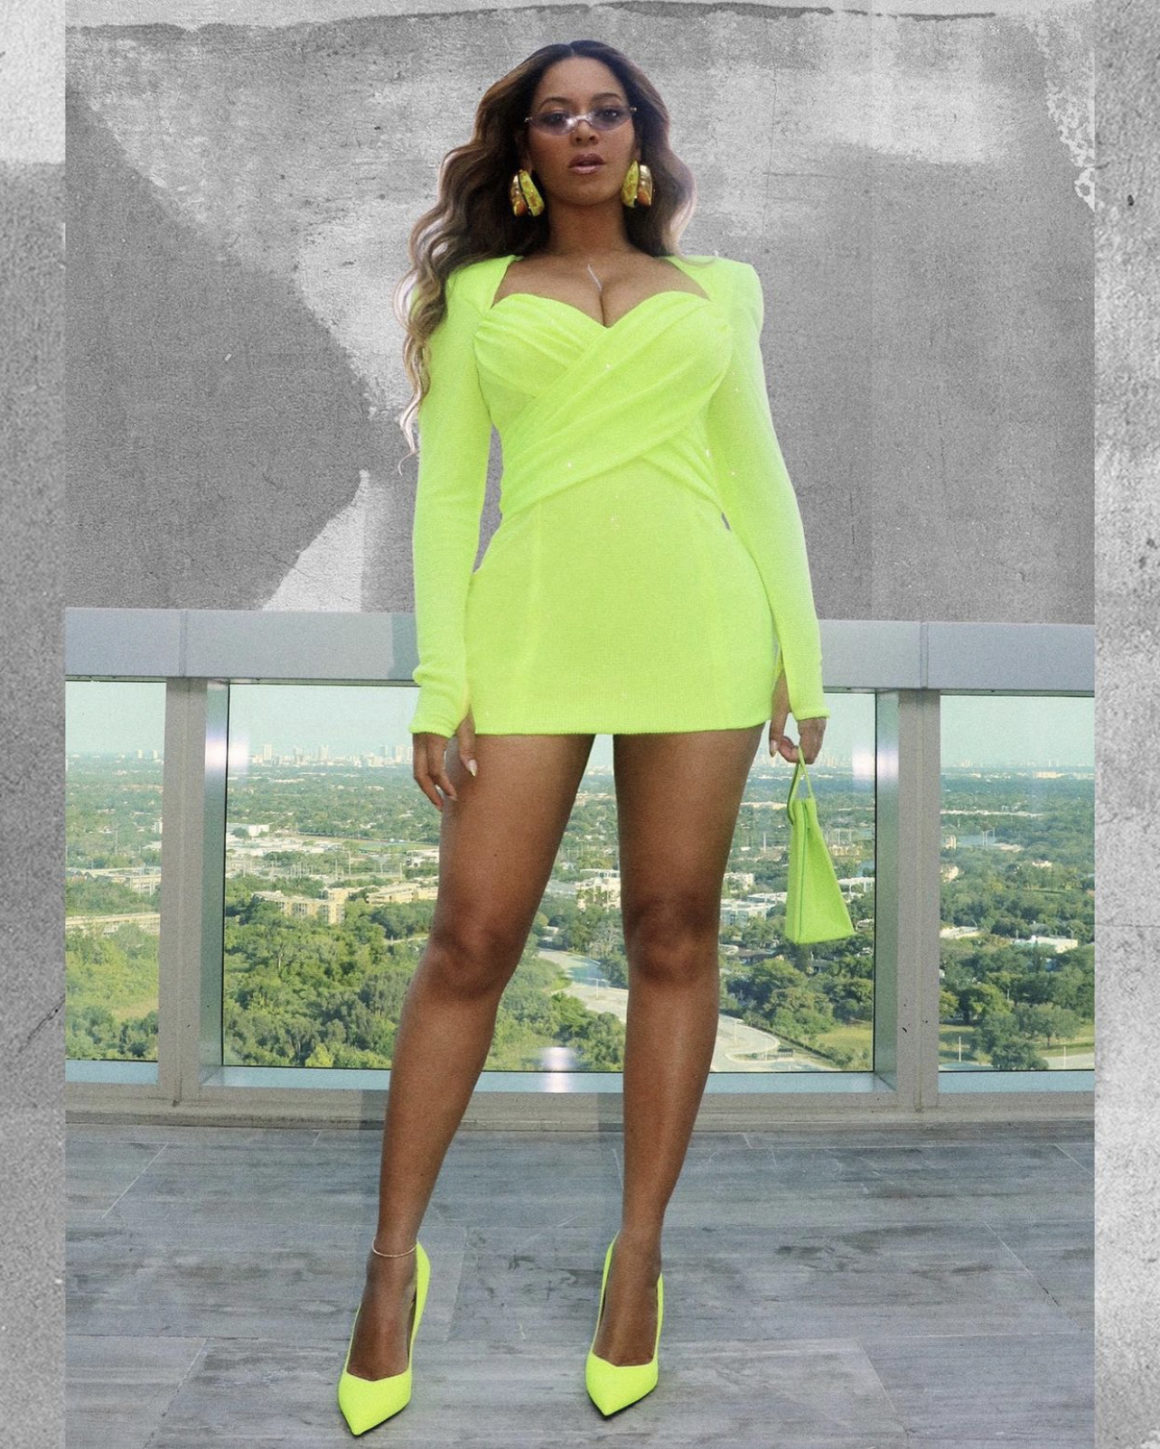 Beyonce Hit Us With Two News Looks Including a Neon Balmain Dress Custom TLZ LFemme Snake Print Shirt Jacquemus Leather Shorts and Francesco Russo Snakeskin Ankle Strap Sandals9